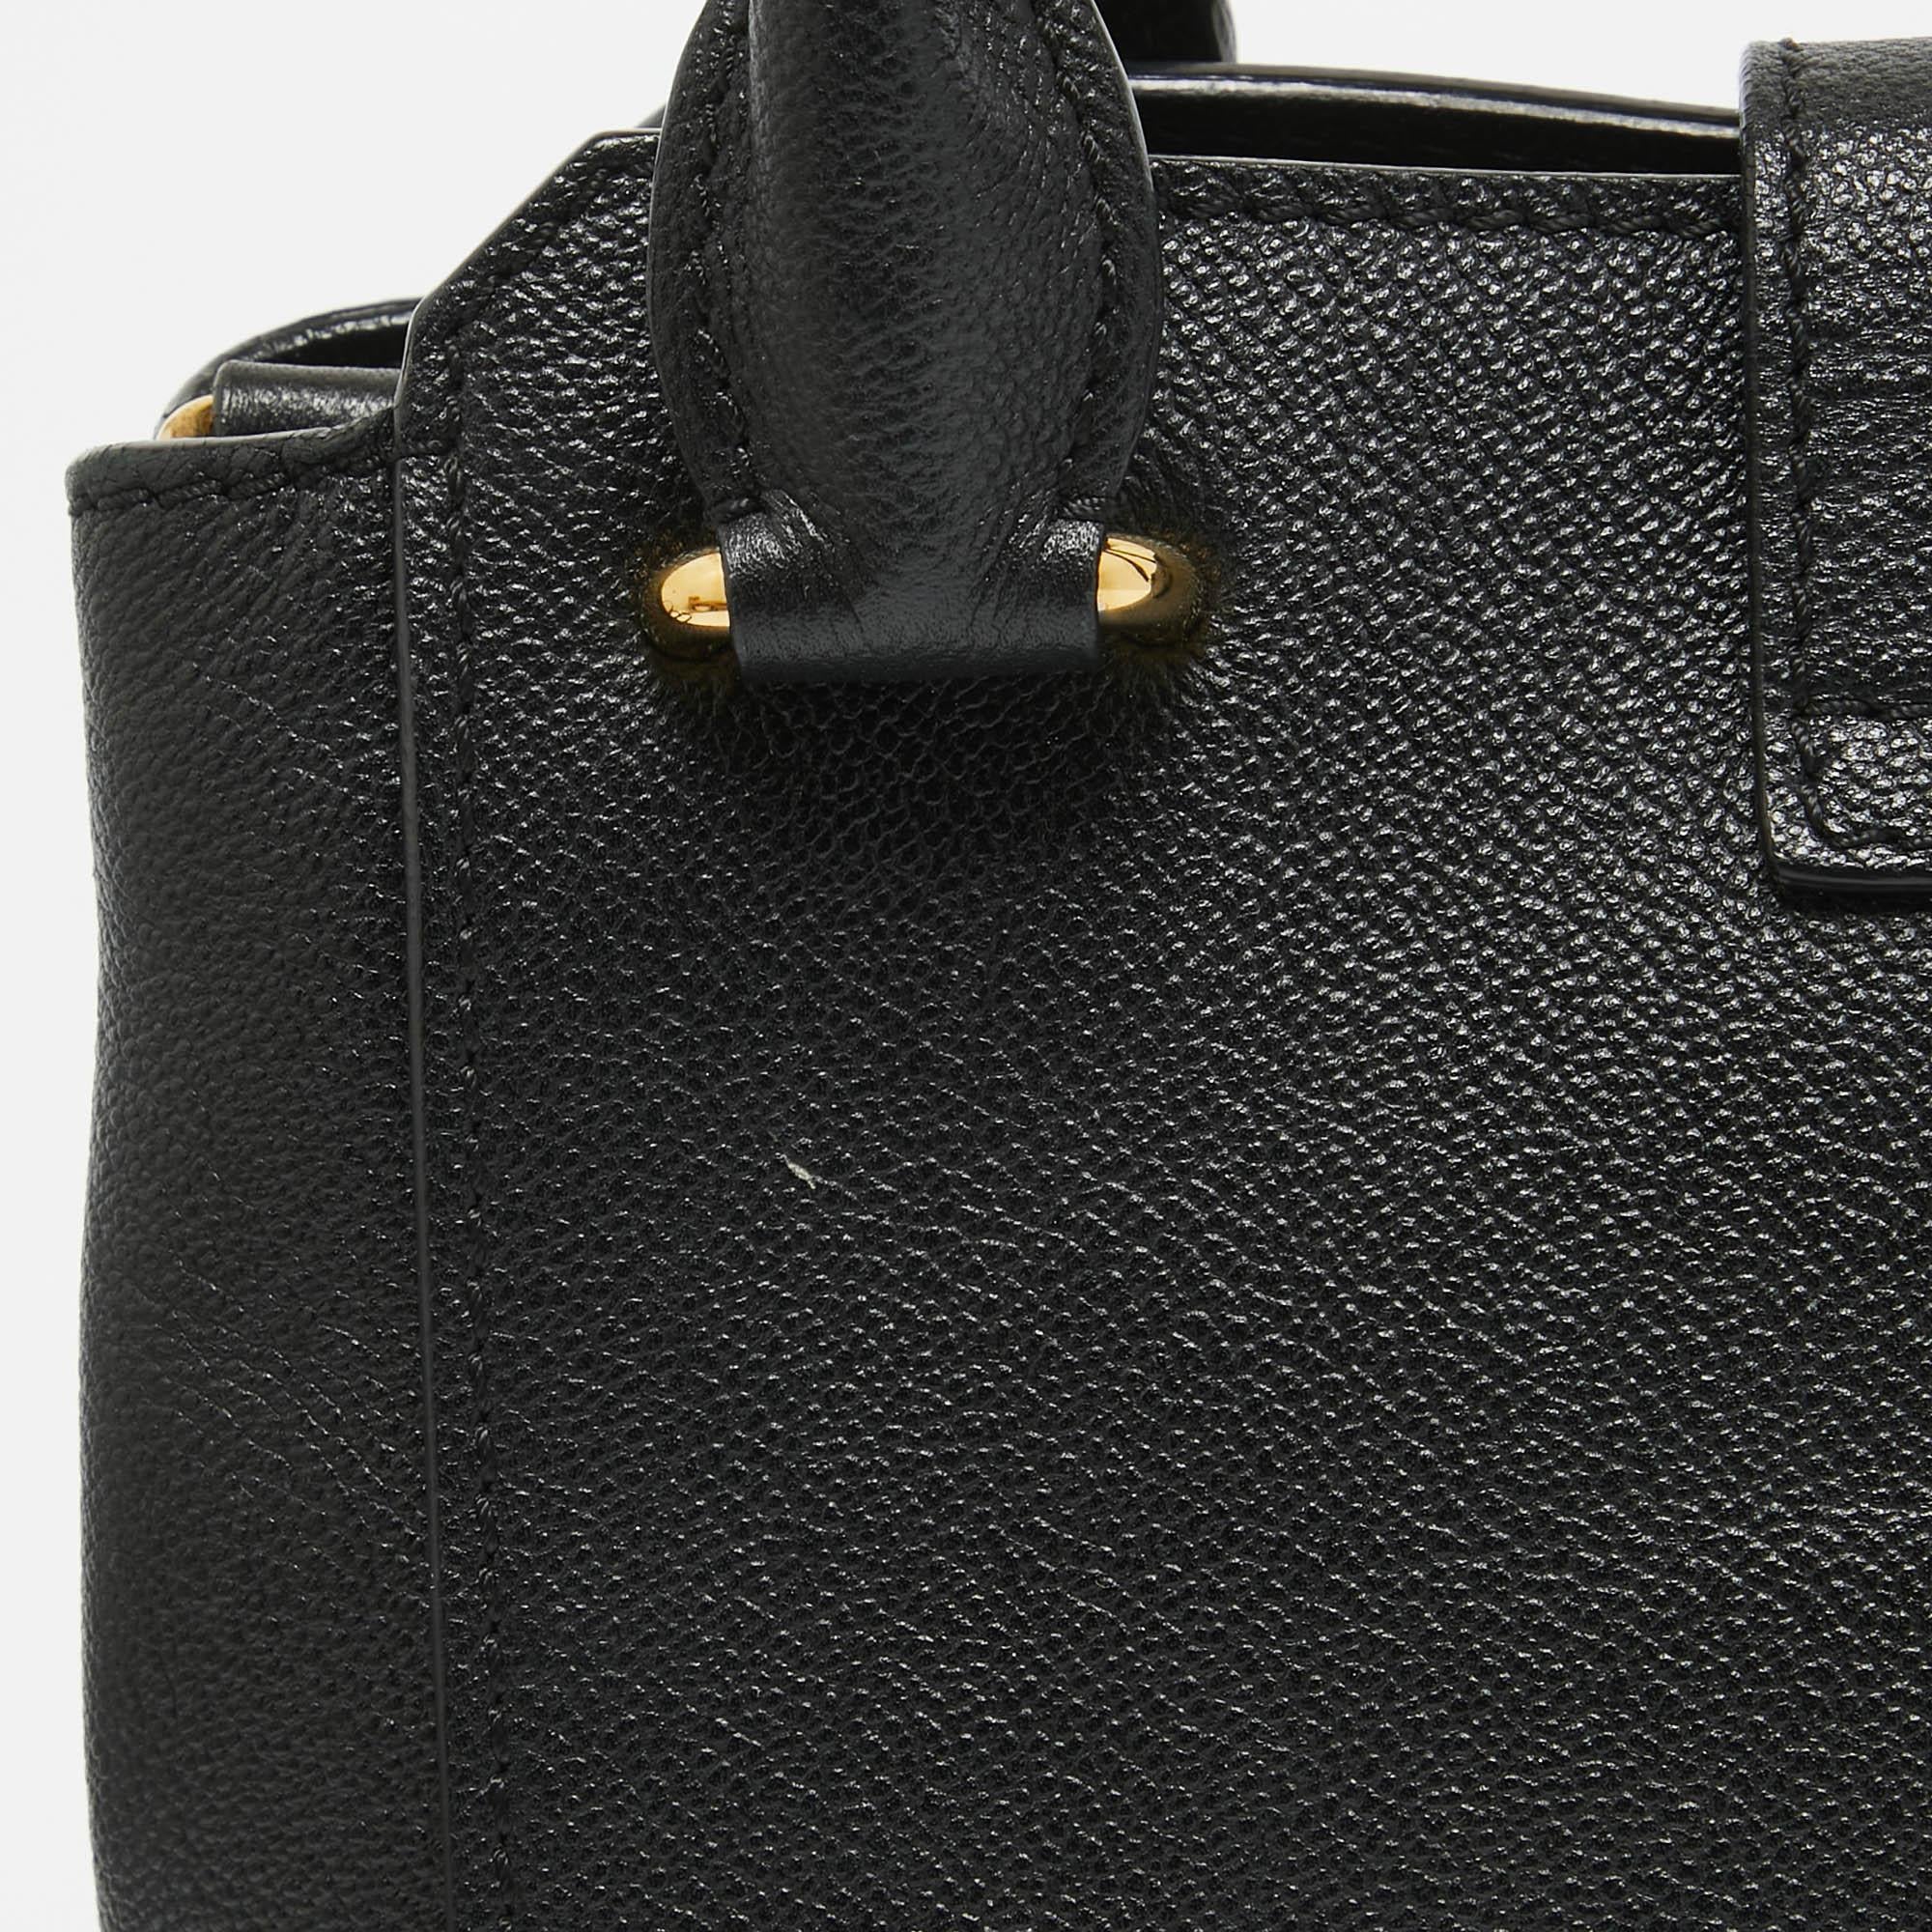 Burberry Black Leather Buckle Flap Tote For Sale 13